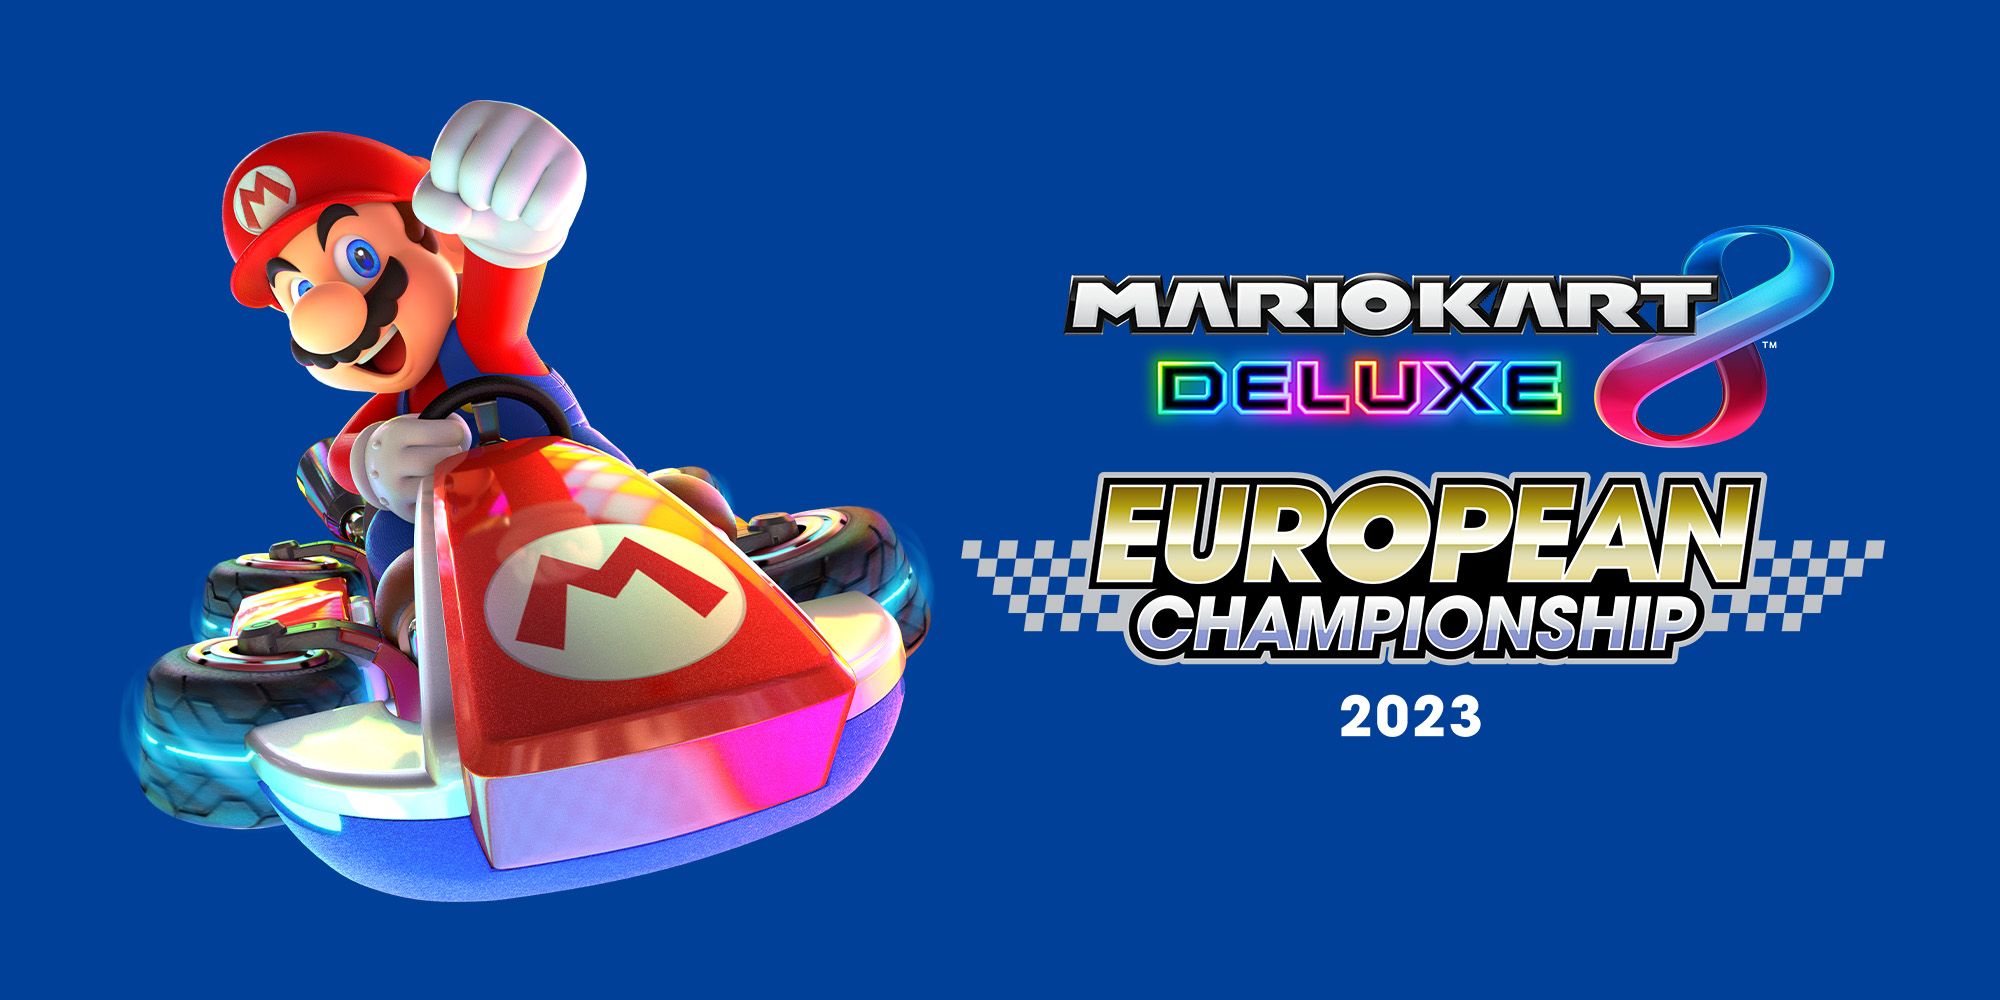 Racers, start your engines! Mario Kart 8 Deluxe European Championship qualifiers start this Saturday 19th of August!